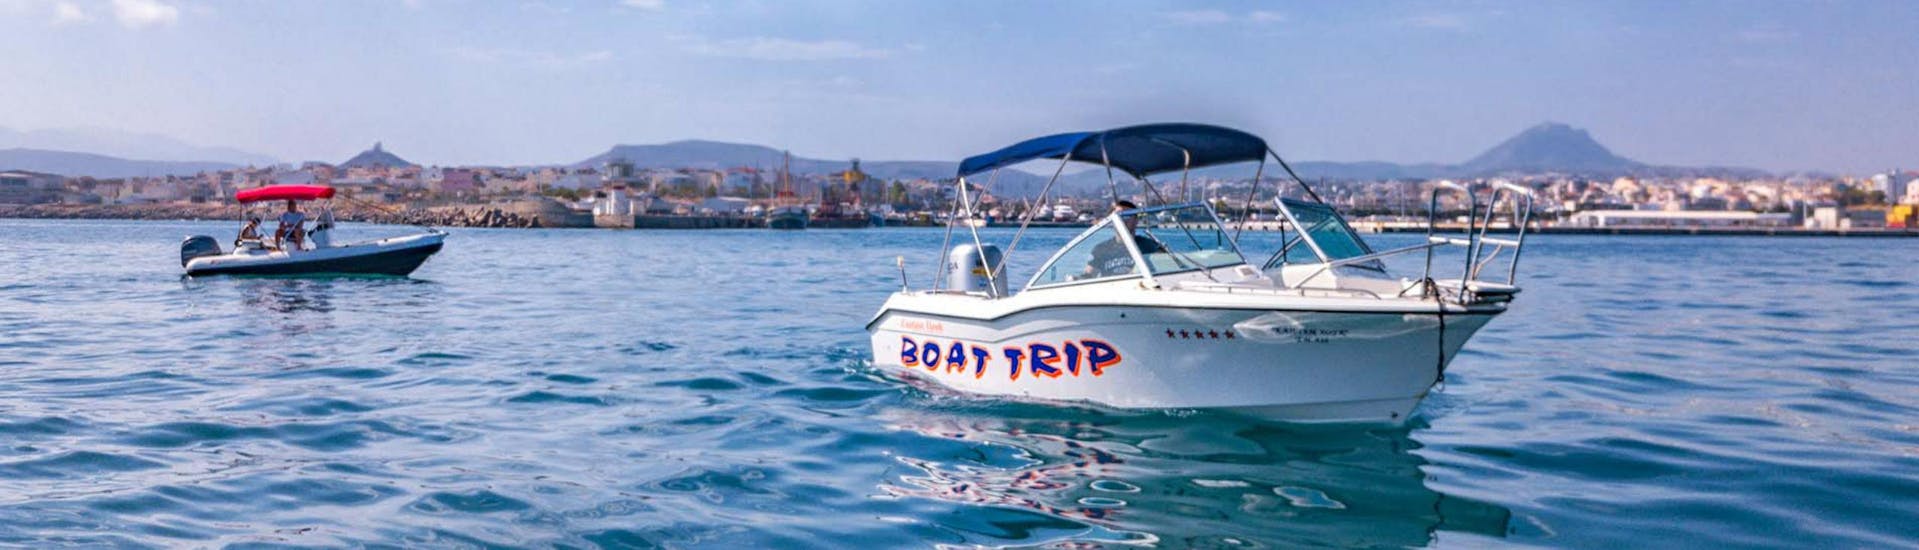 Private Boat Trip 'Snorkeling and Fishing' from Heraklion.